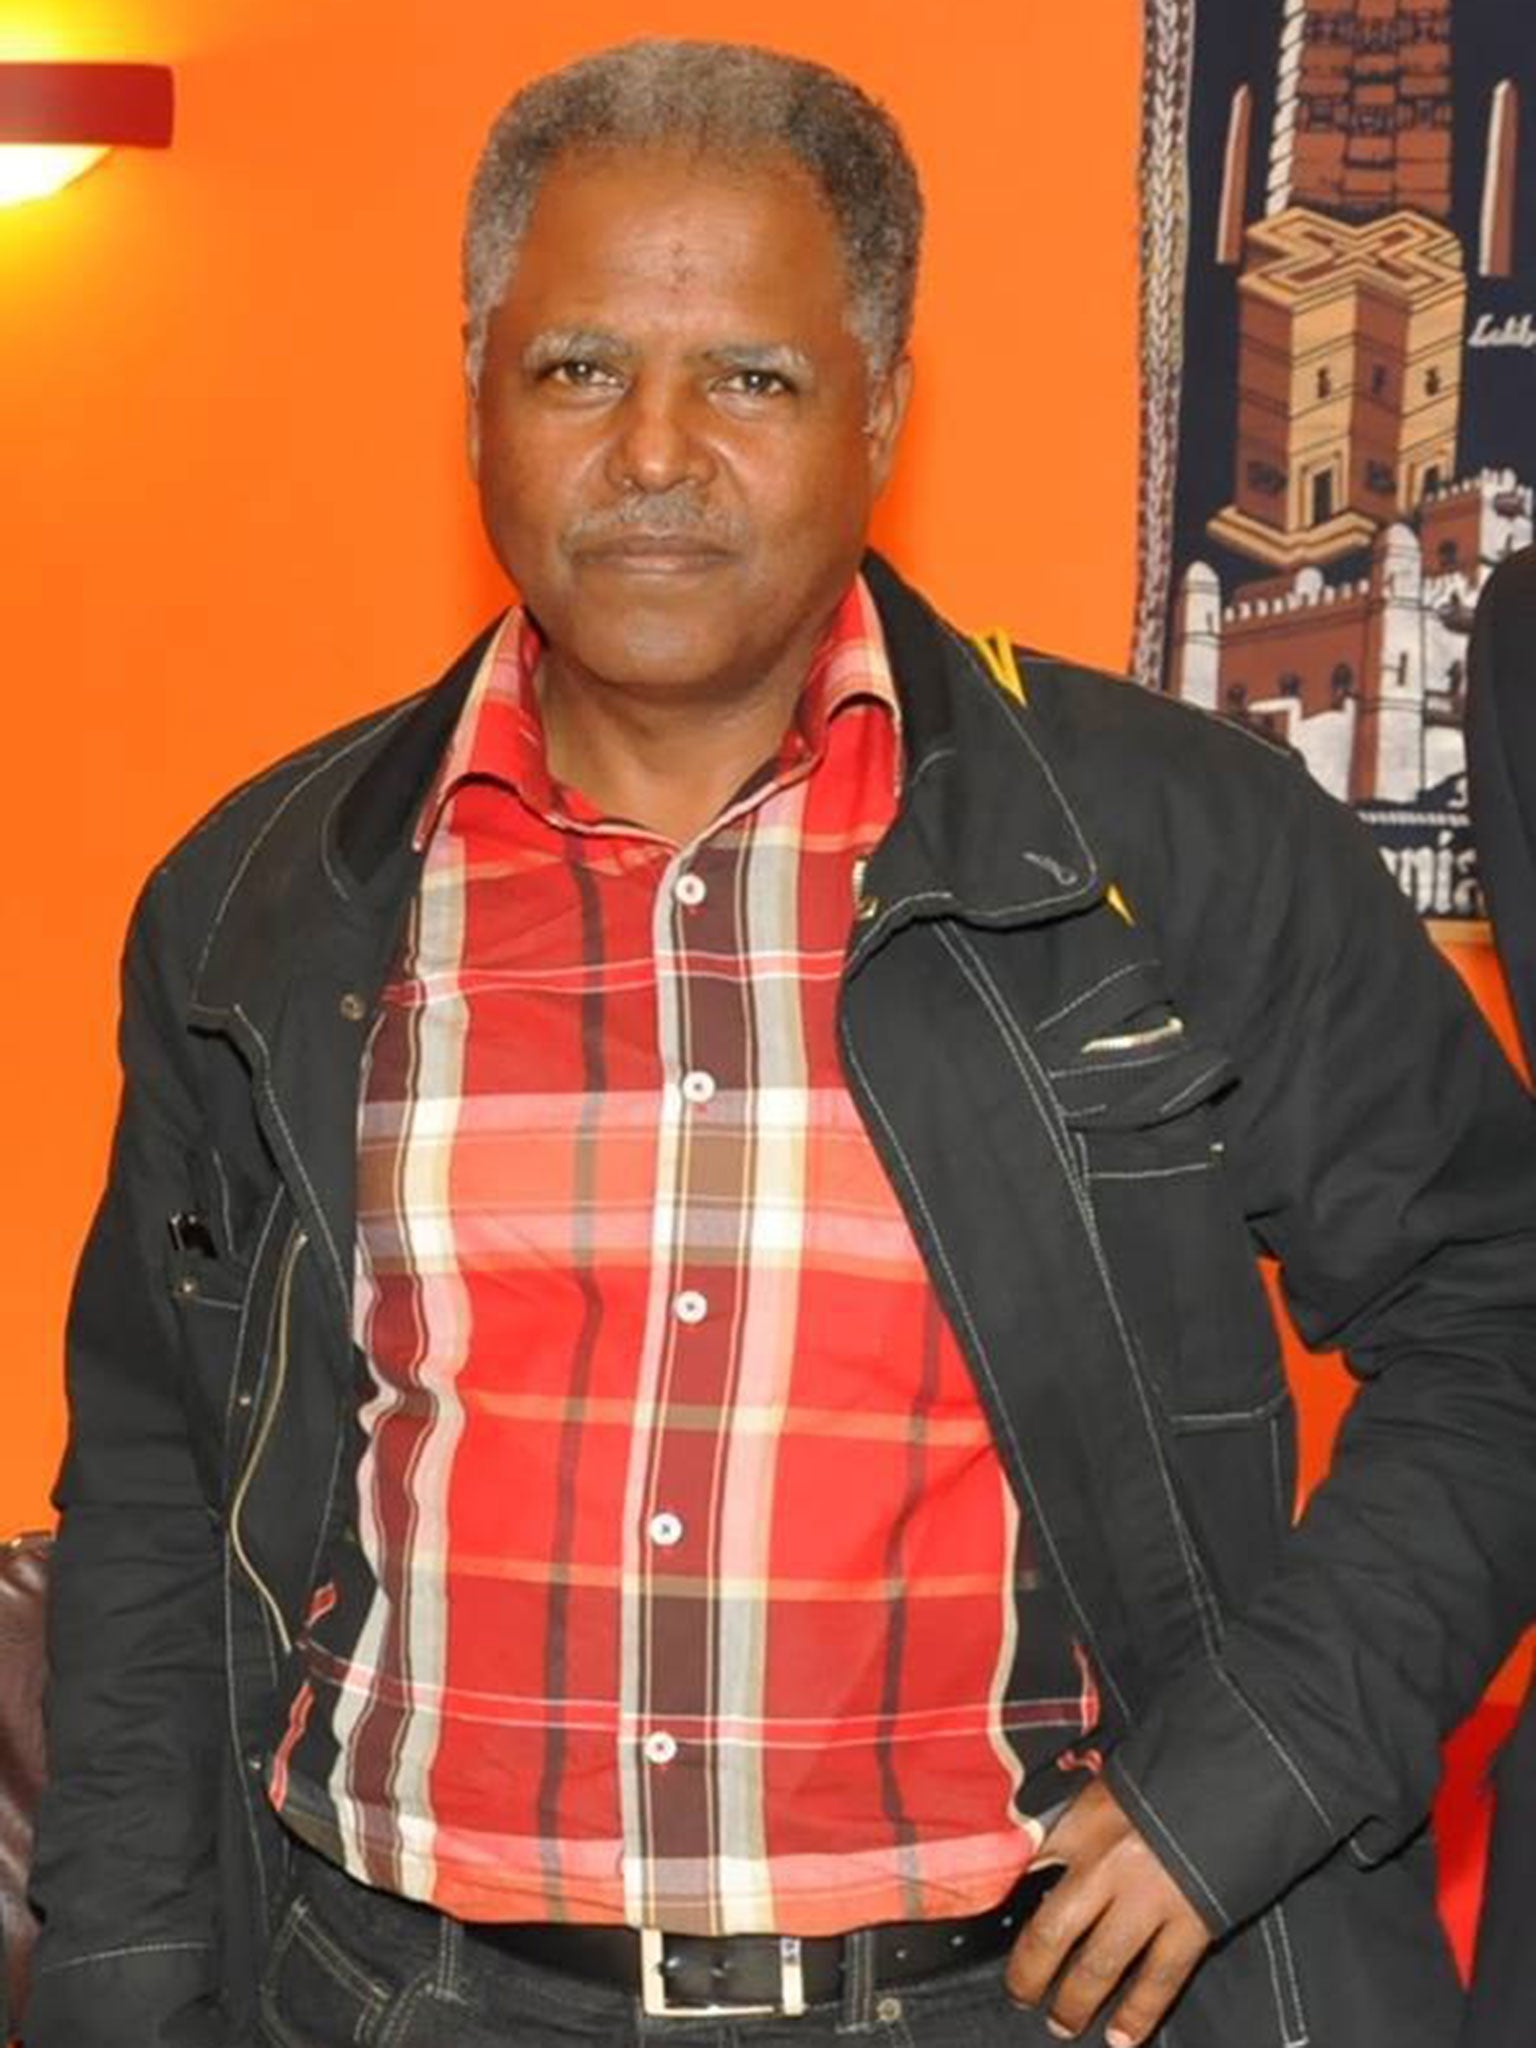 Andy Tsege is accused of being part of a ‘terrorist organisation’ that wants to overthrow the Ethiopian government